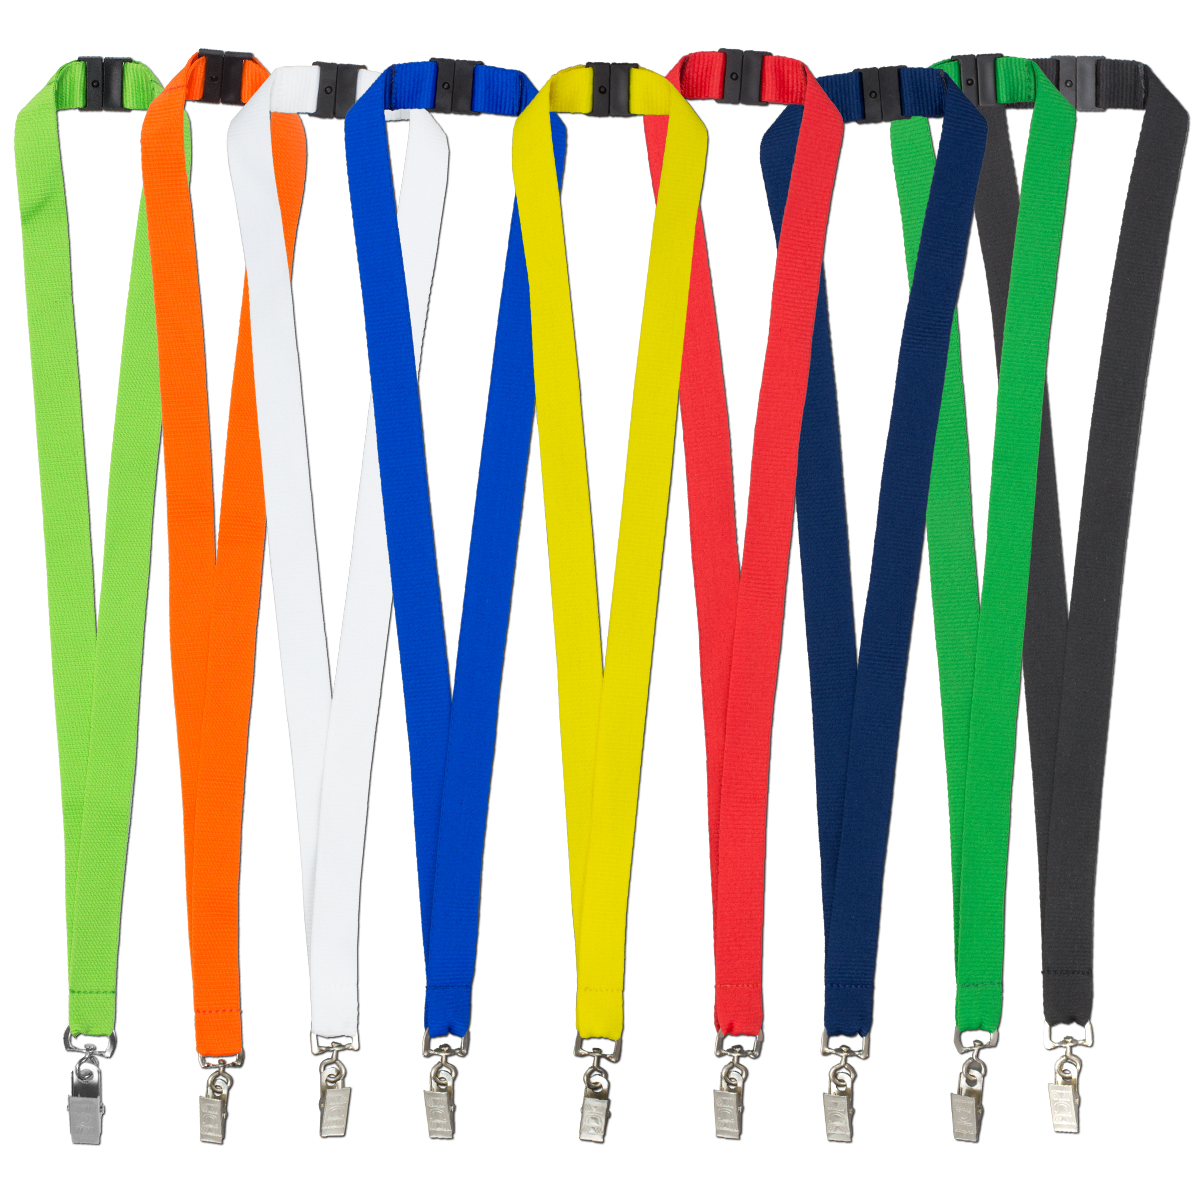 3/4" Blank Lanyard with Breakaway Safety Release Attachment - Bulldog Clip